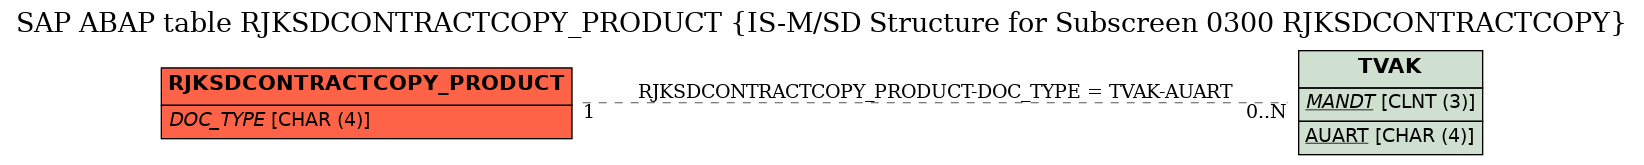 E-R Diagram for table RJKSDCONTRACTCOPY_PRODUCT (IS-M/SD Structure for Subscreen 0300 RJKSDCONTRACTCOPY)